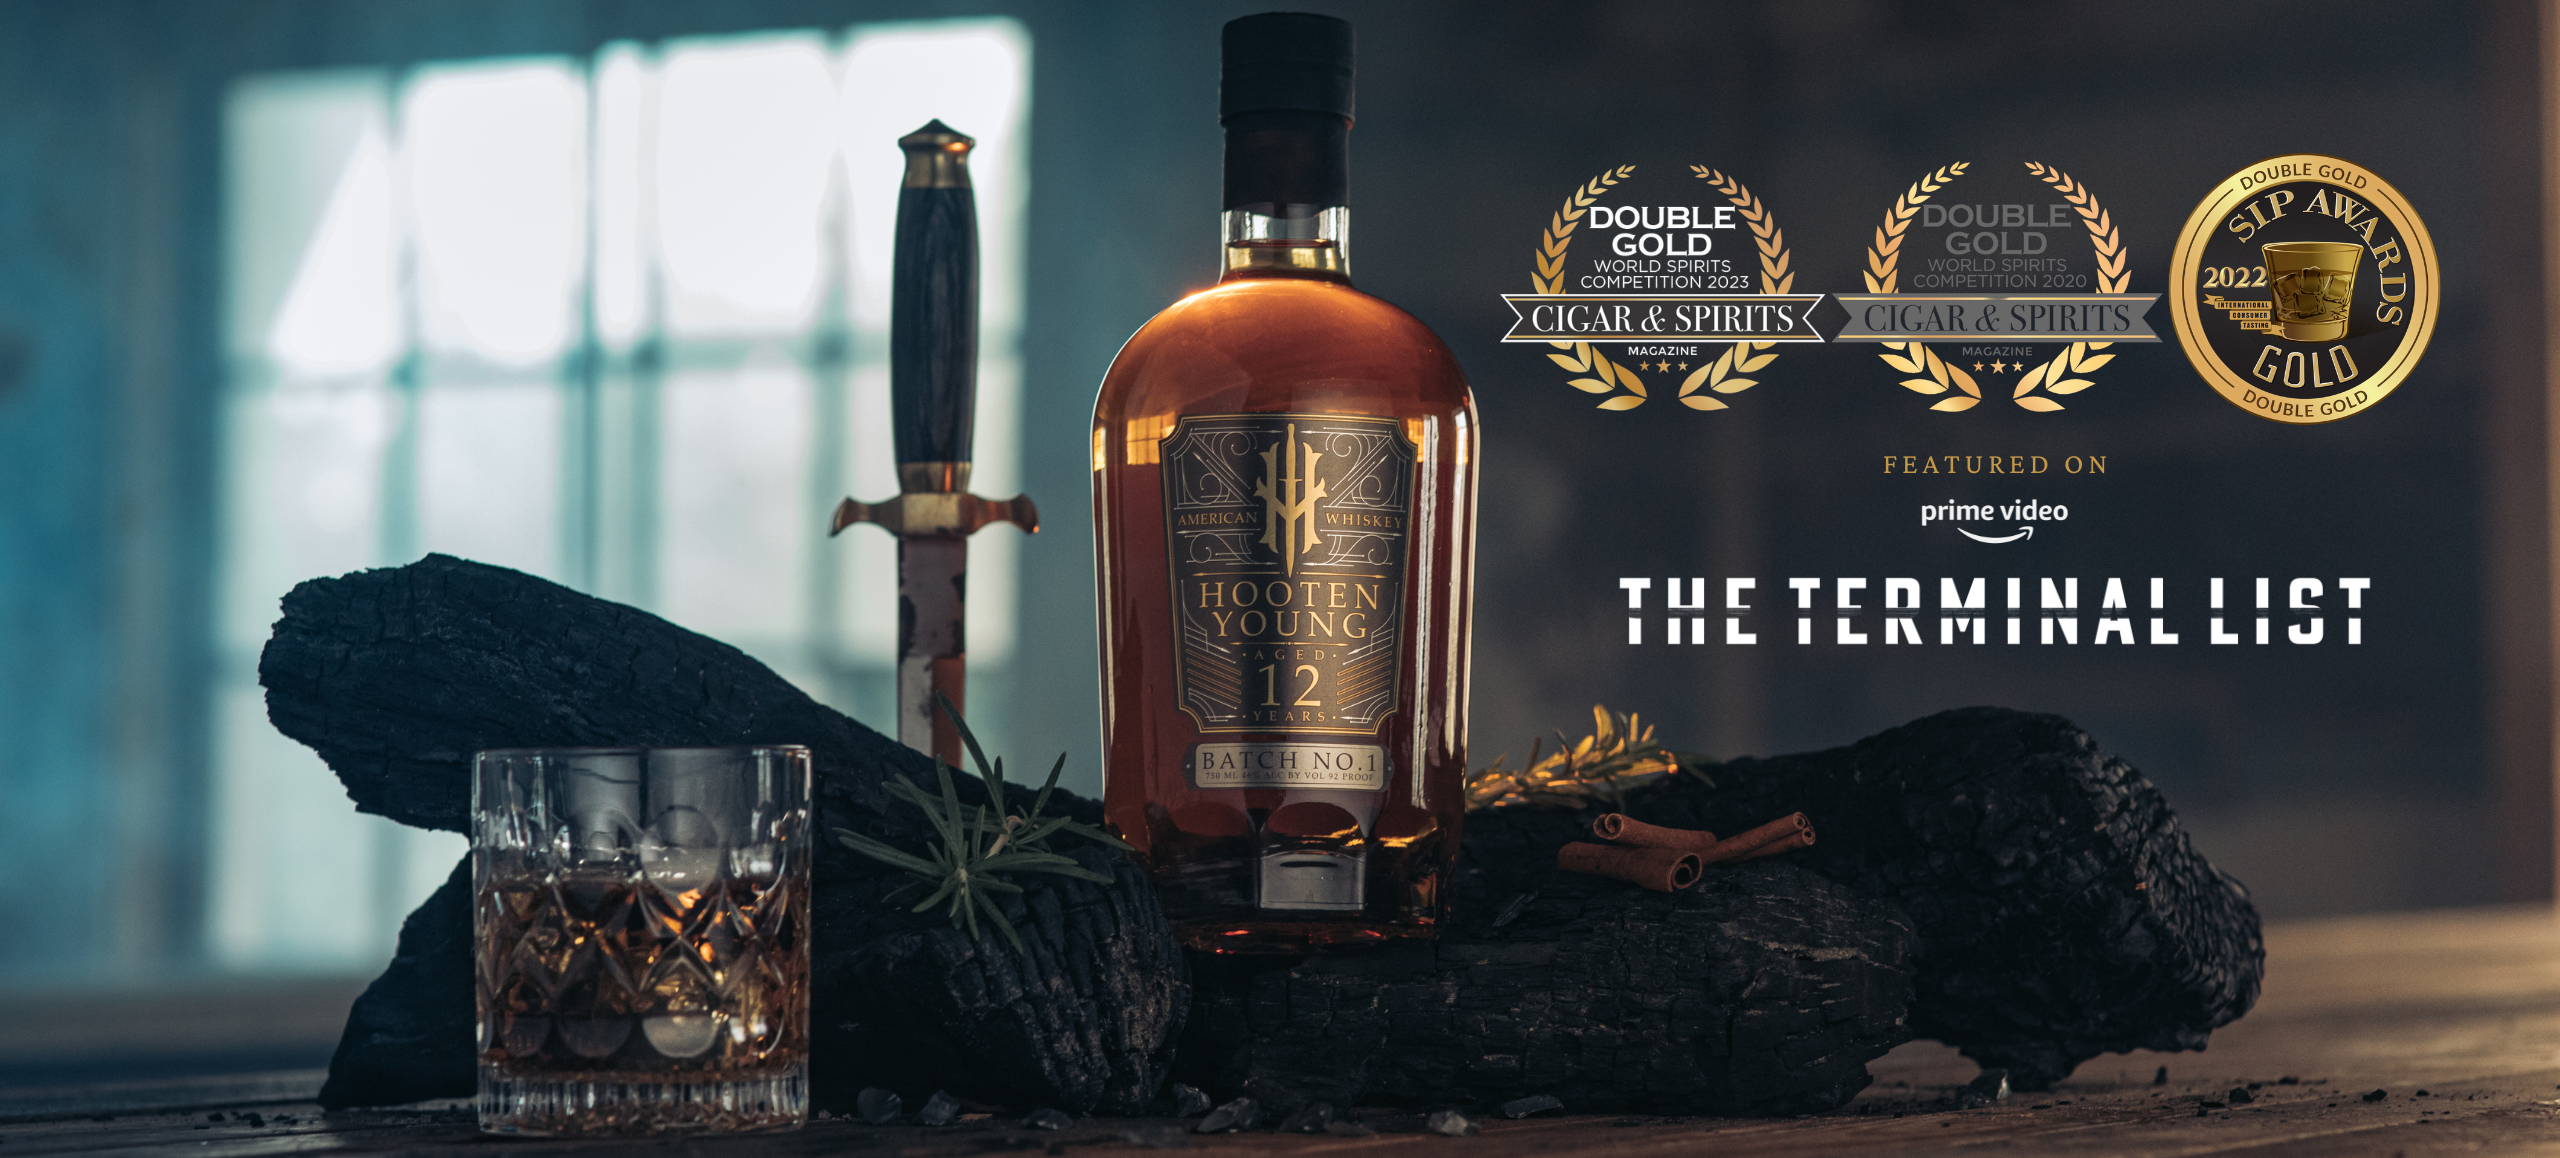 hooten young 12 year american whiskey wins double gold, featured on the terminal list